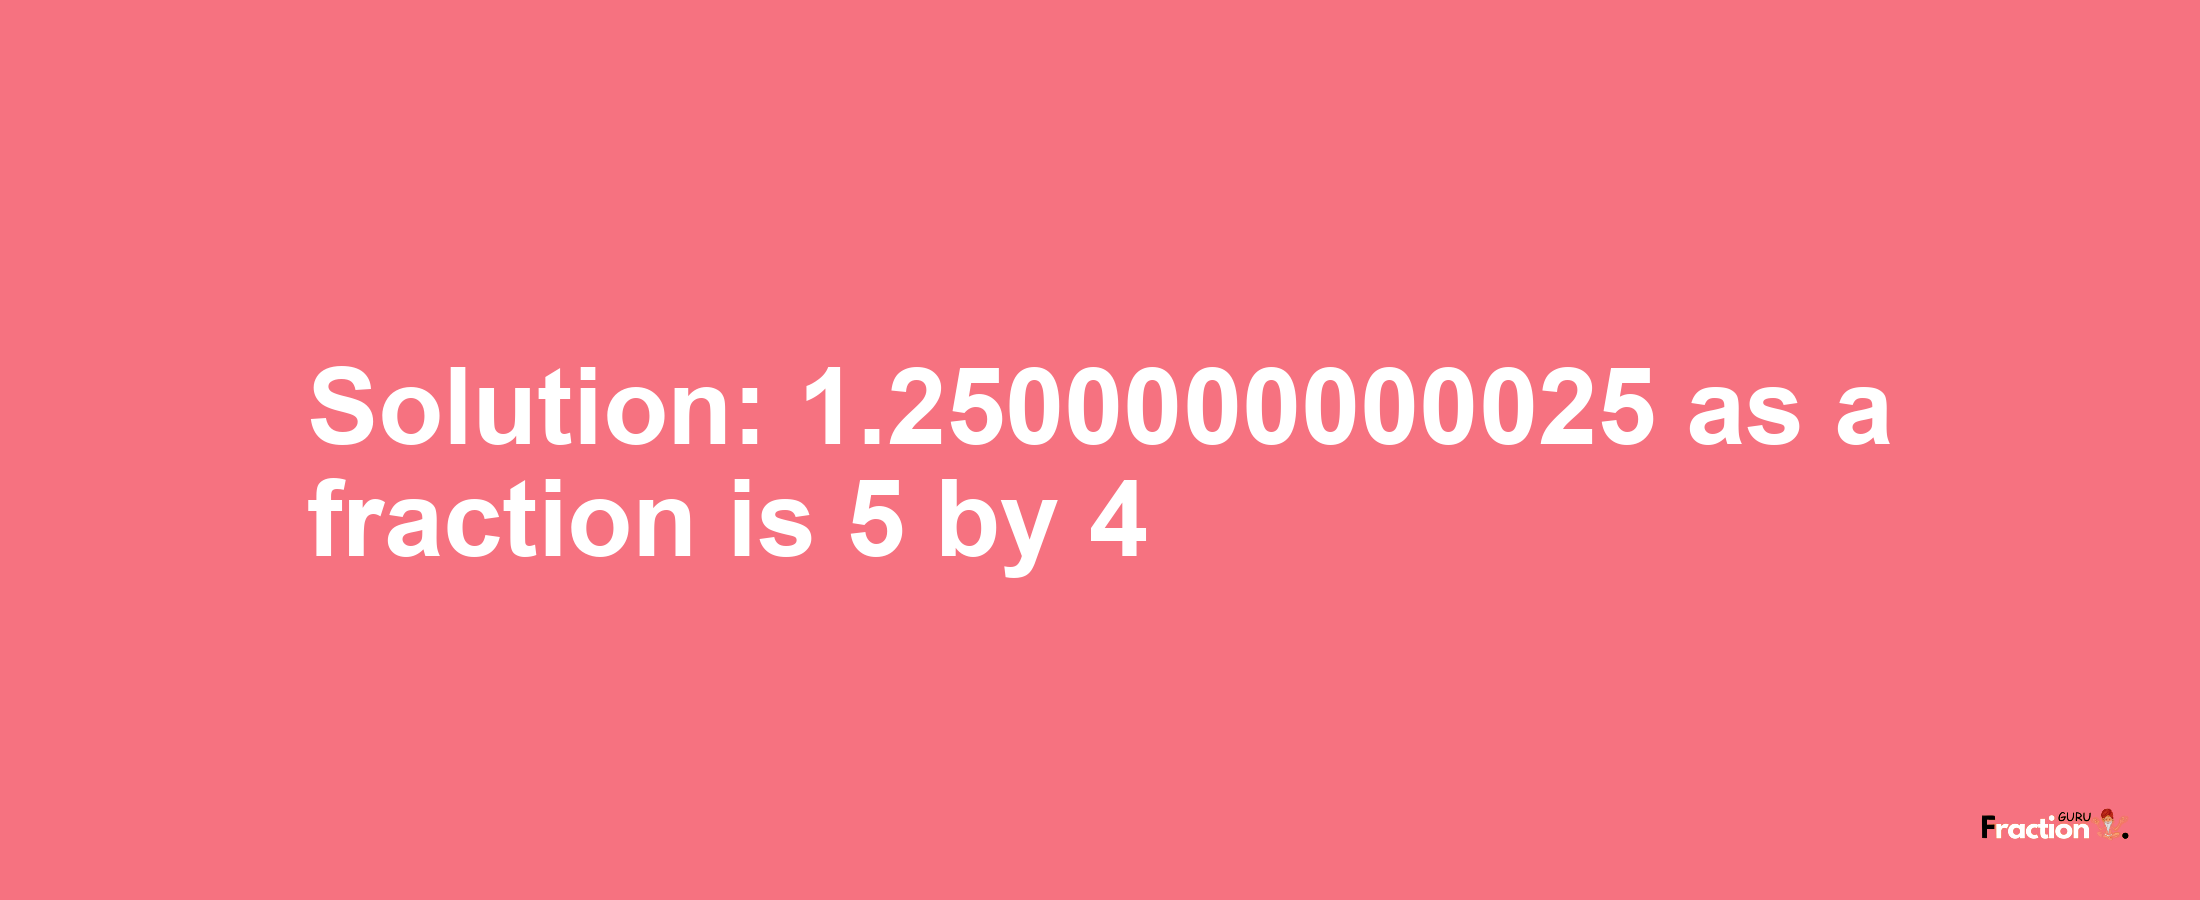 Solution:1.2500000000025 as a fraction is 5/4